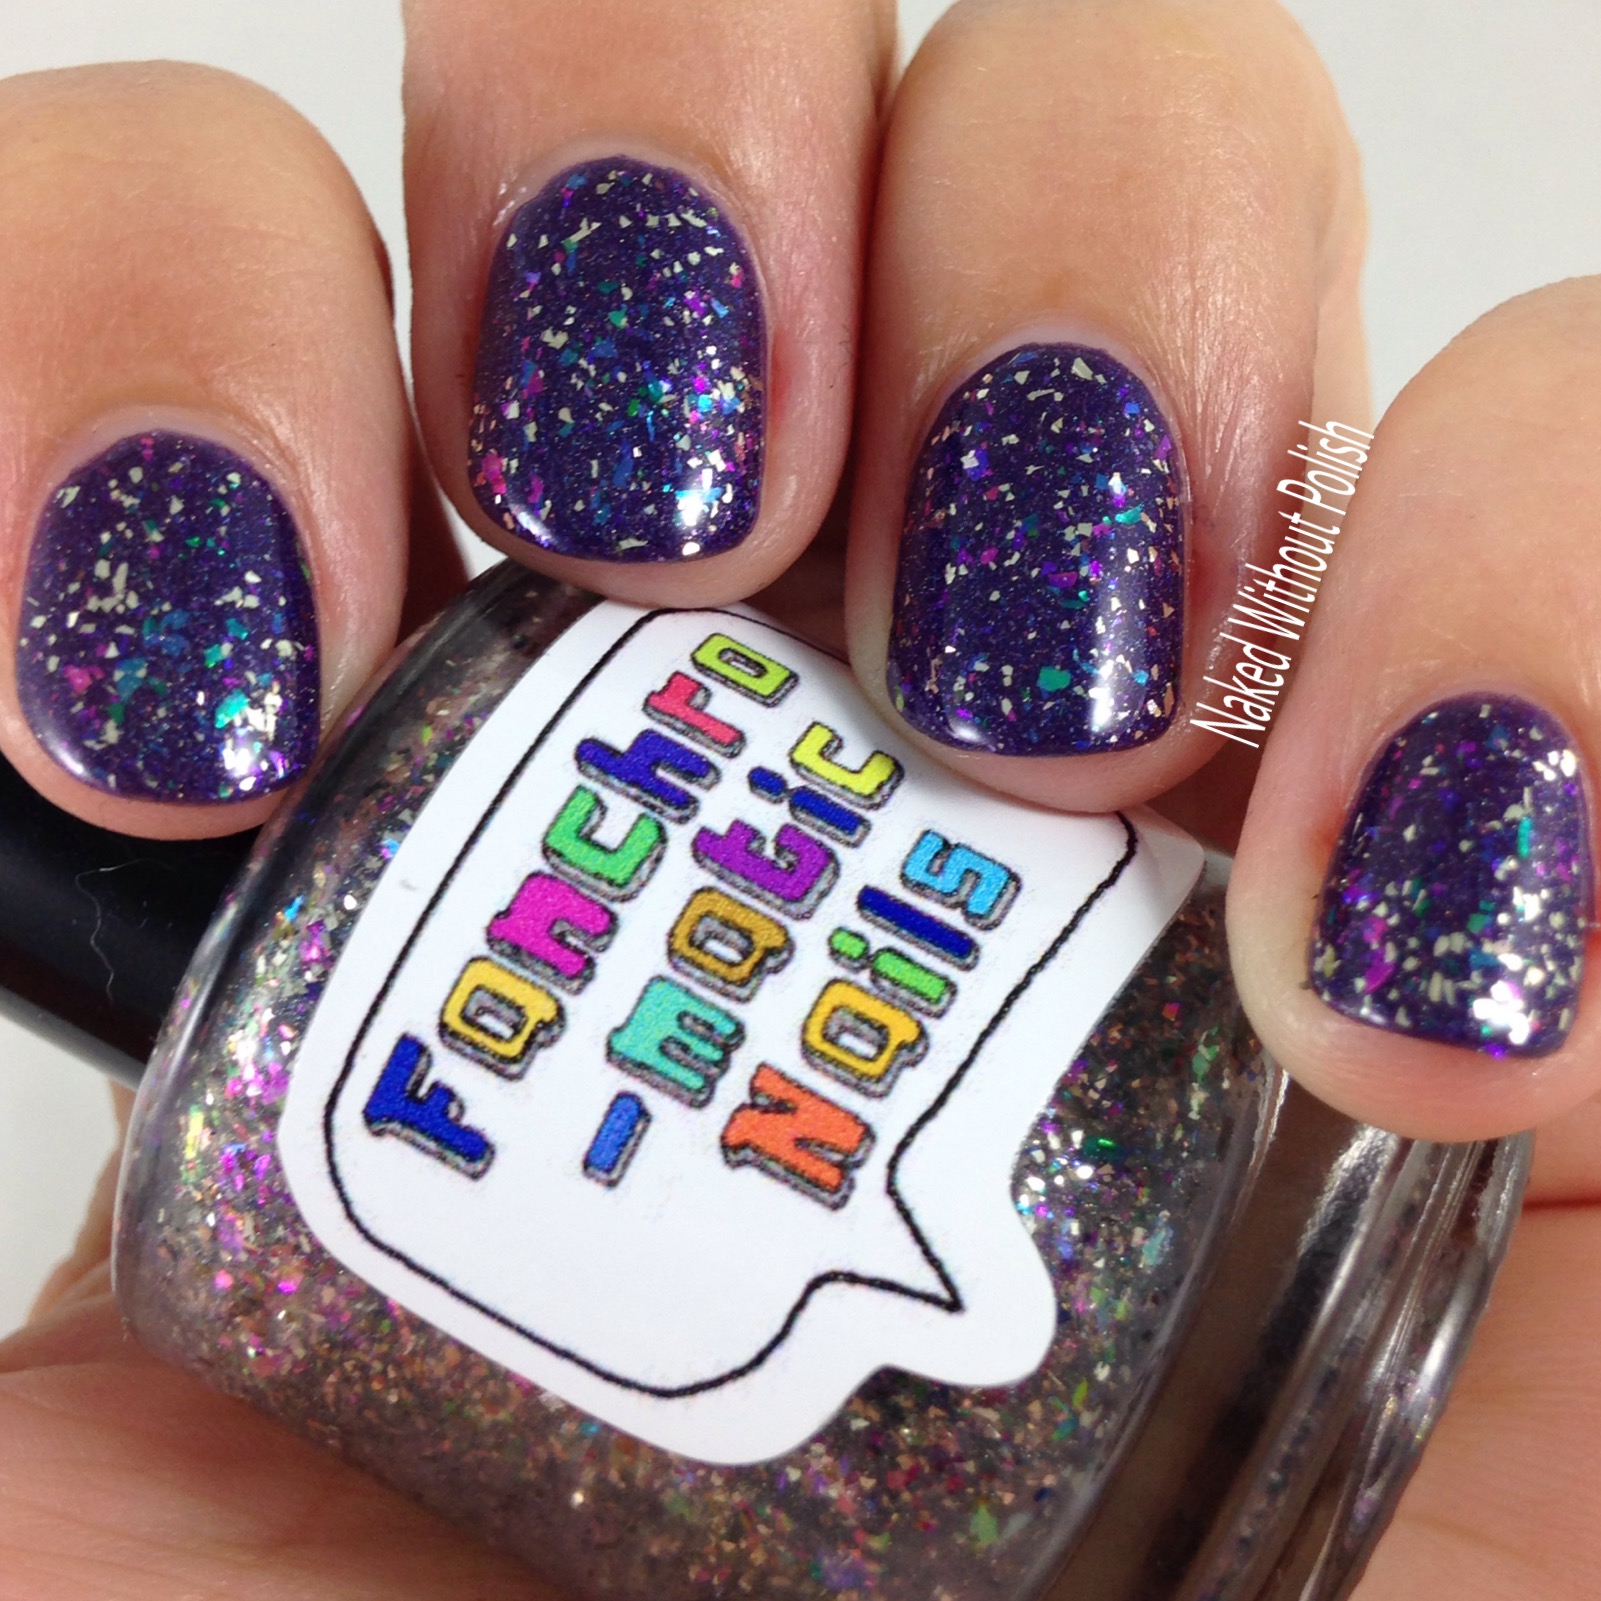 Fanchromatic-Nails-Revel-in-Your-Time-6